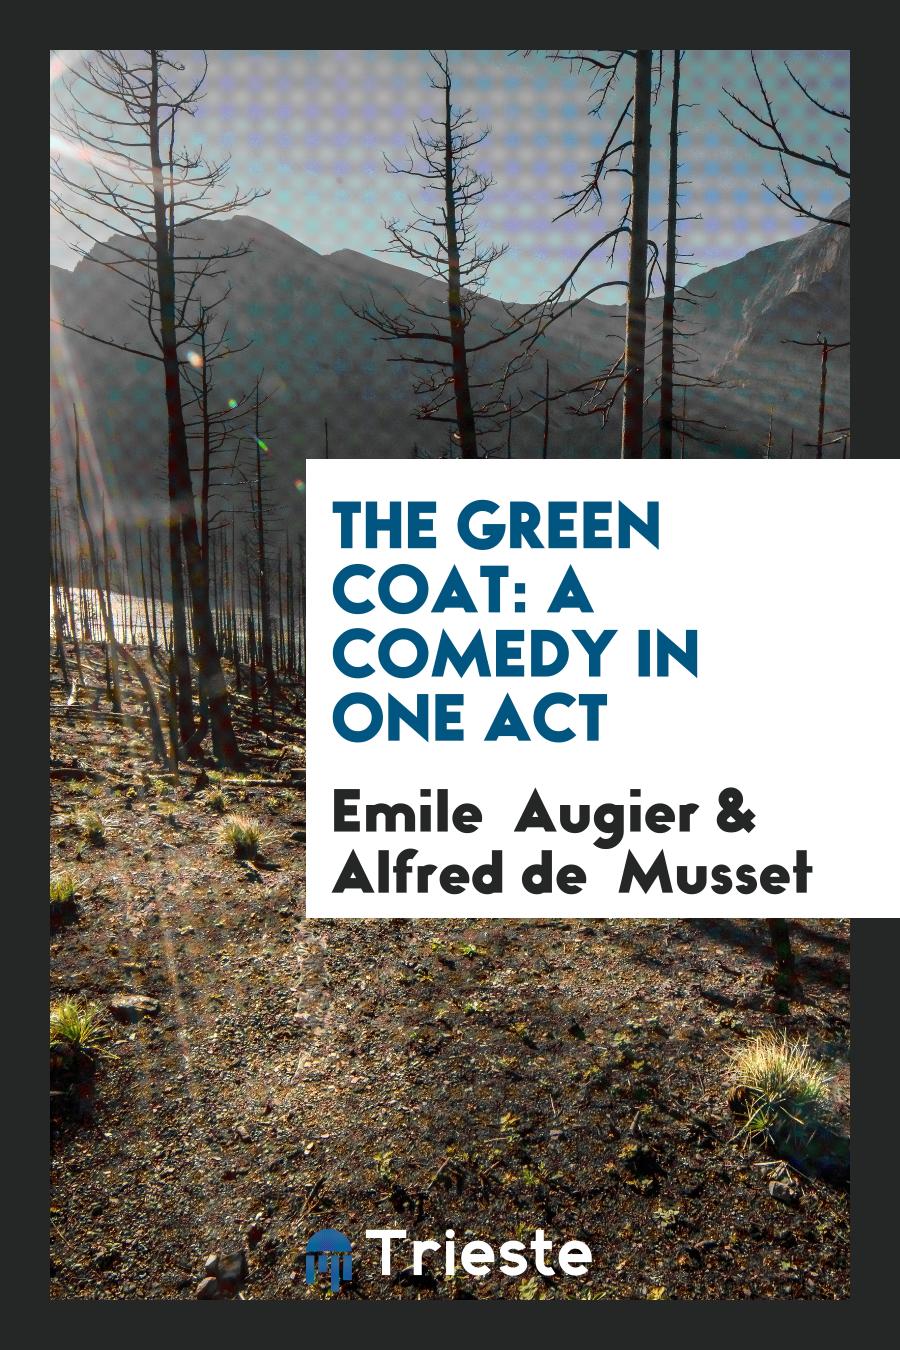 The Green Coat: a Comedy in One Act